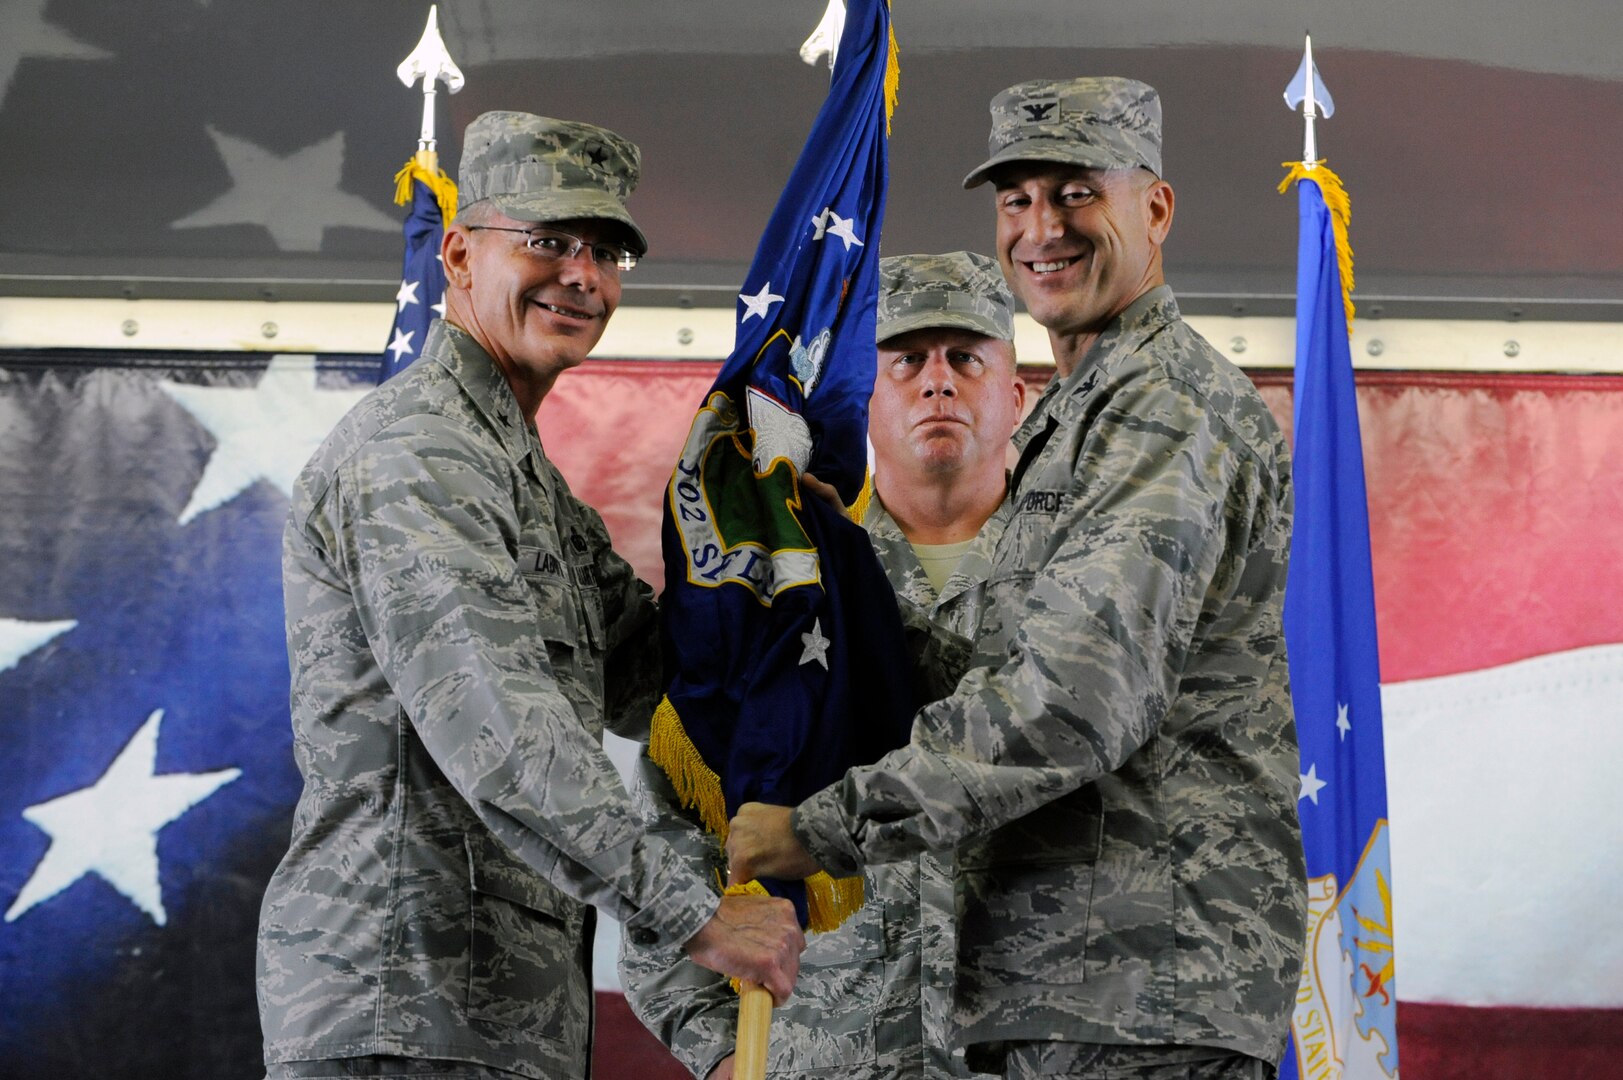 Brig. Gen. Bob LaBrutta (left), 502nd Air Base Wing and Joint Base San Antonio commander, passes the guidon to Col. Michael Gimbrone, incoming 502nd Security Forces and Logistics Support Group commander, Aug. 26, 2014 at JBSA-Randolph Hangar 73. As the 502nd SFLSG commander, Gimbrone will oversee the 502nd Security Forces Squadron, 802nd SFS, 902nd SFS, 502nd Logistics Readiness Squadron and 502nd Trainer Development Squadron. Gimbrone most recently served as deputy chief of the Force Protection Division and chief of the Asset Protection Branch in the Joint Staff Force Structure, Resources and Assessment Directorate at the Pentagon. (U.S. Air Force photo by Desiree Pilacios)